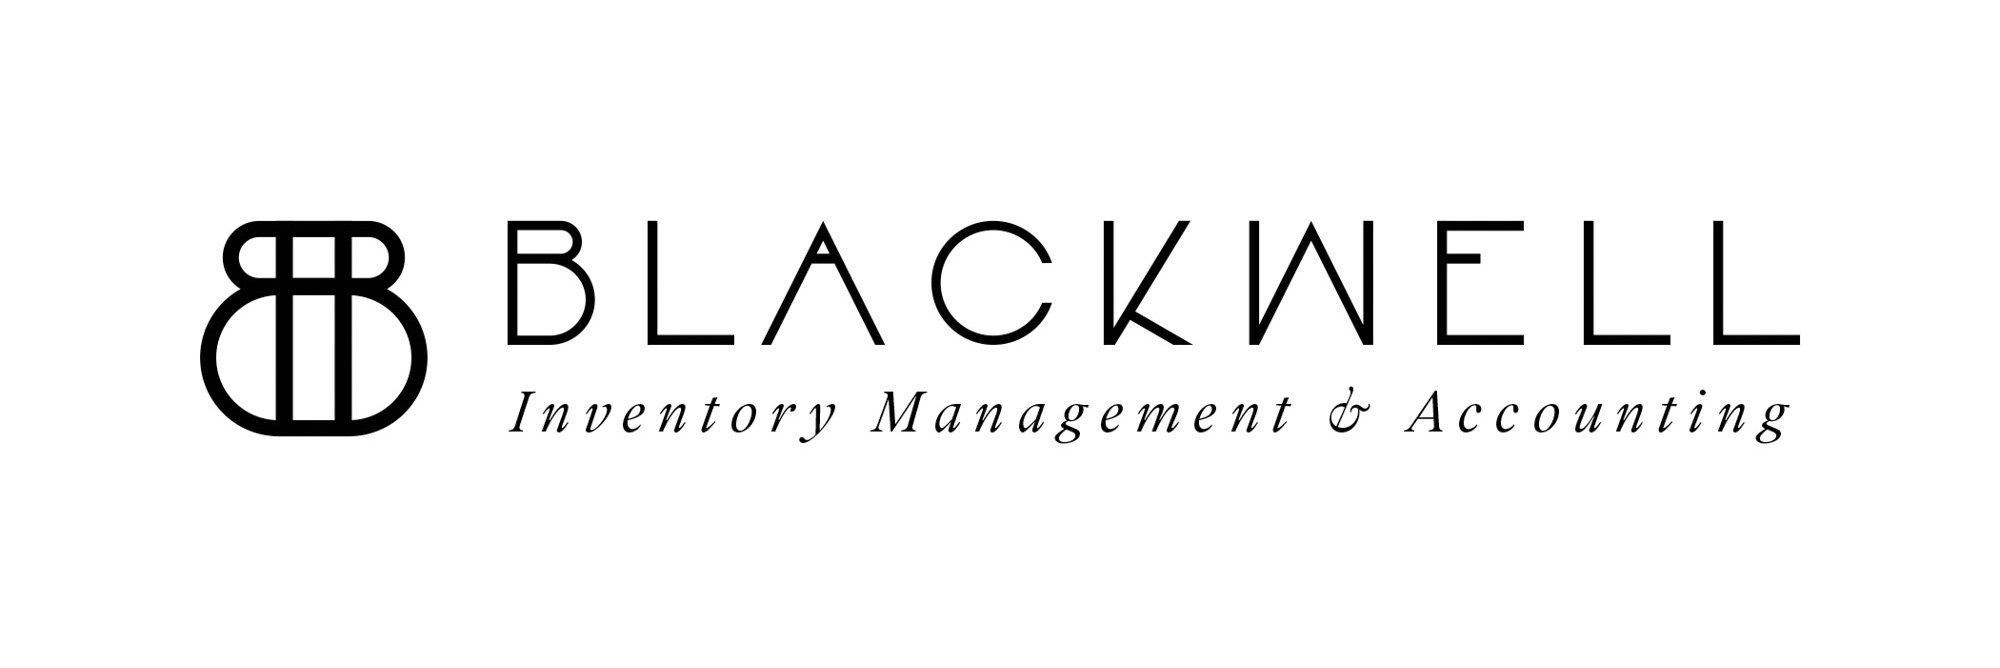 Blackwell - Inventory Management and Accounting